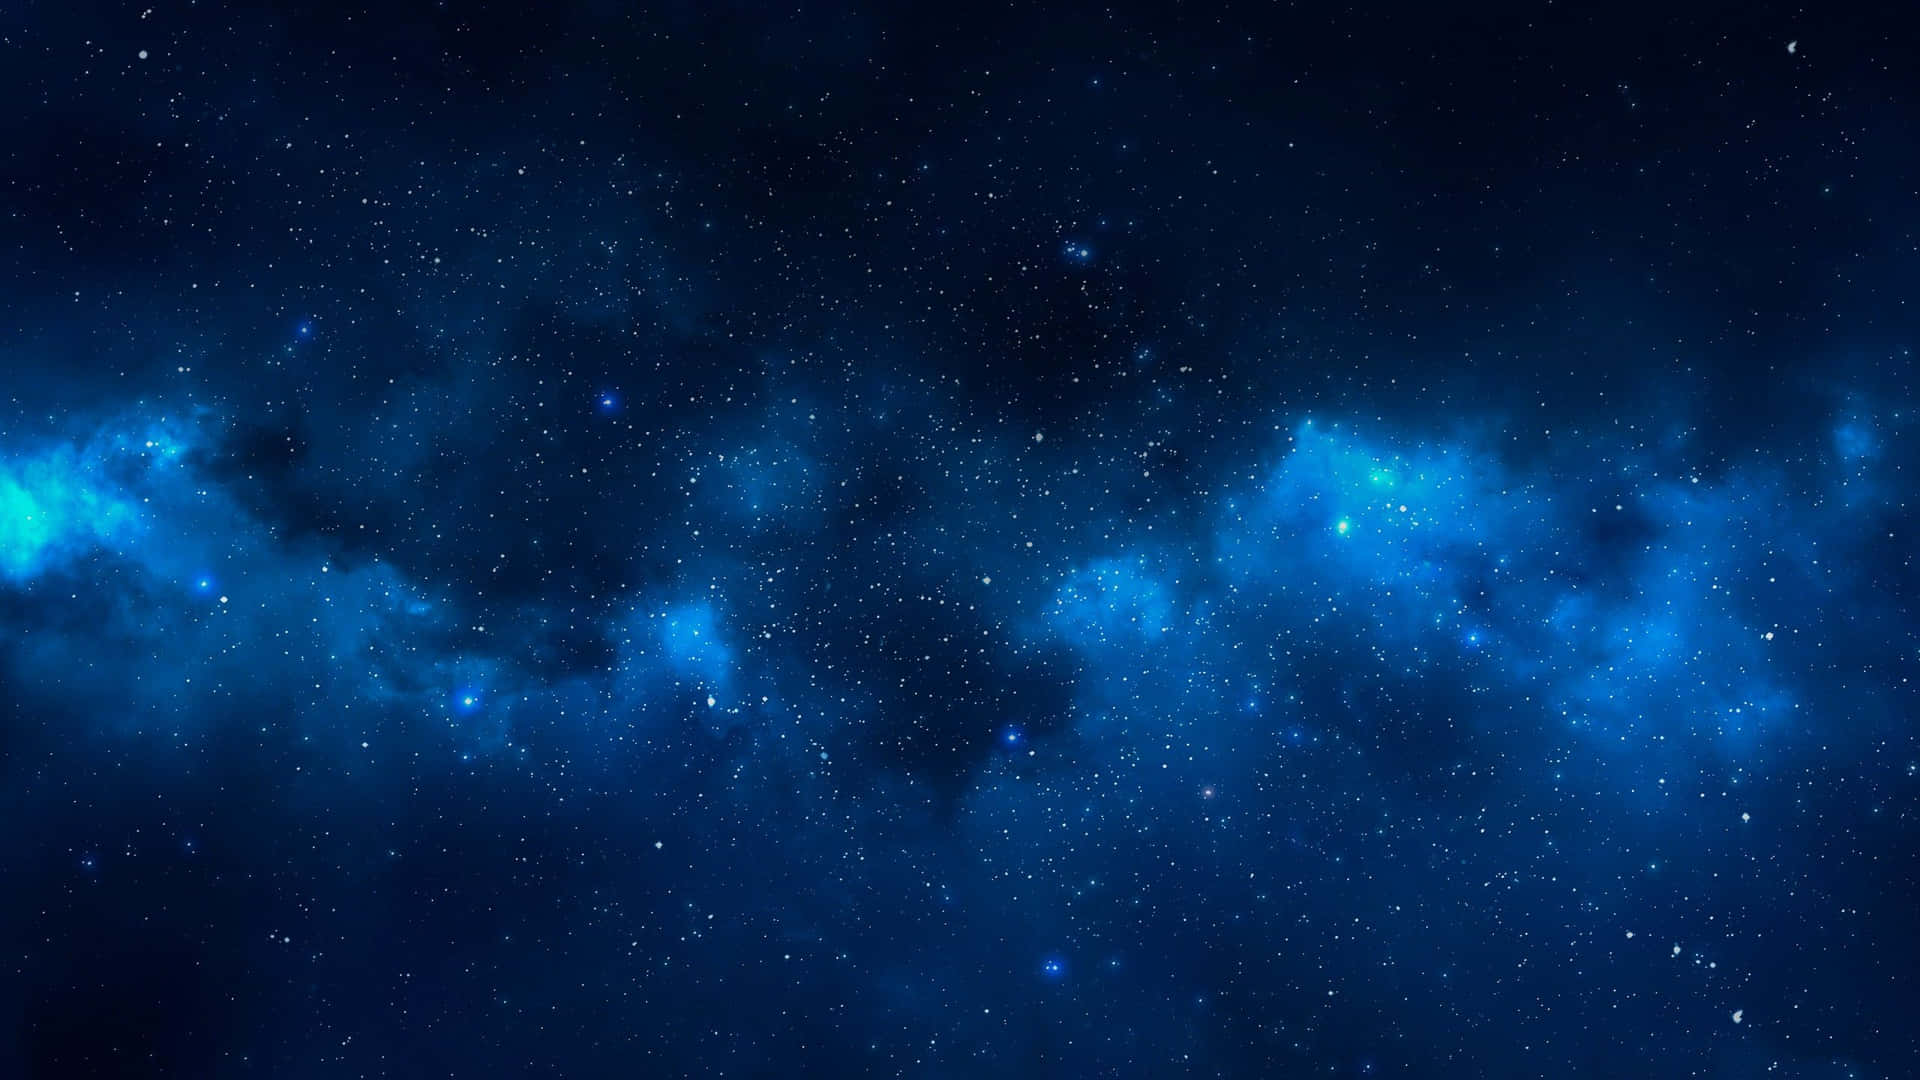 "The mysterious depths of our universe." Wallpaper